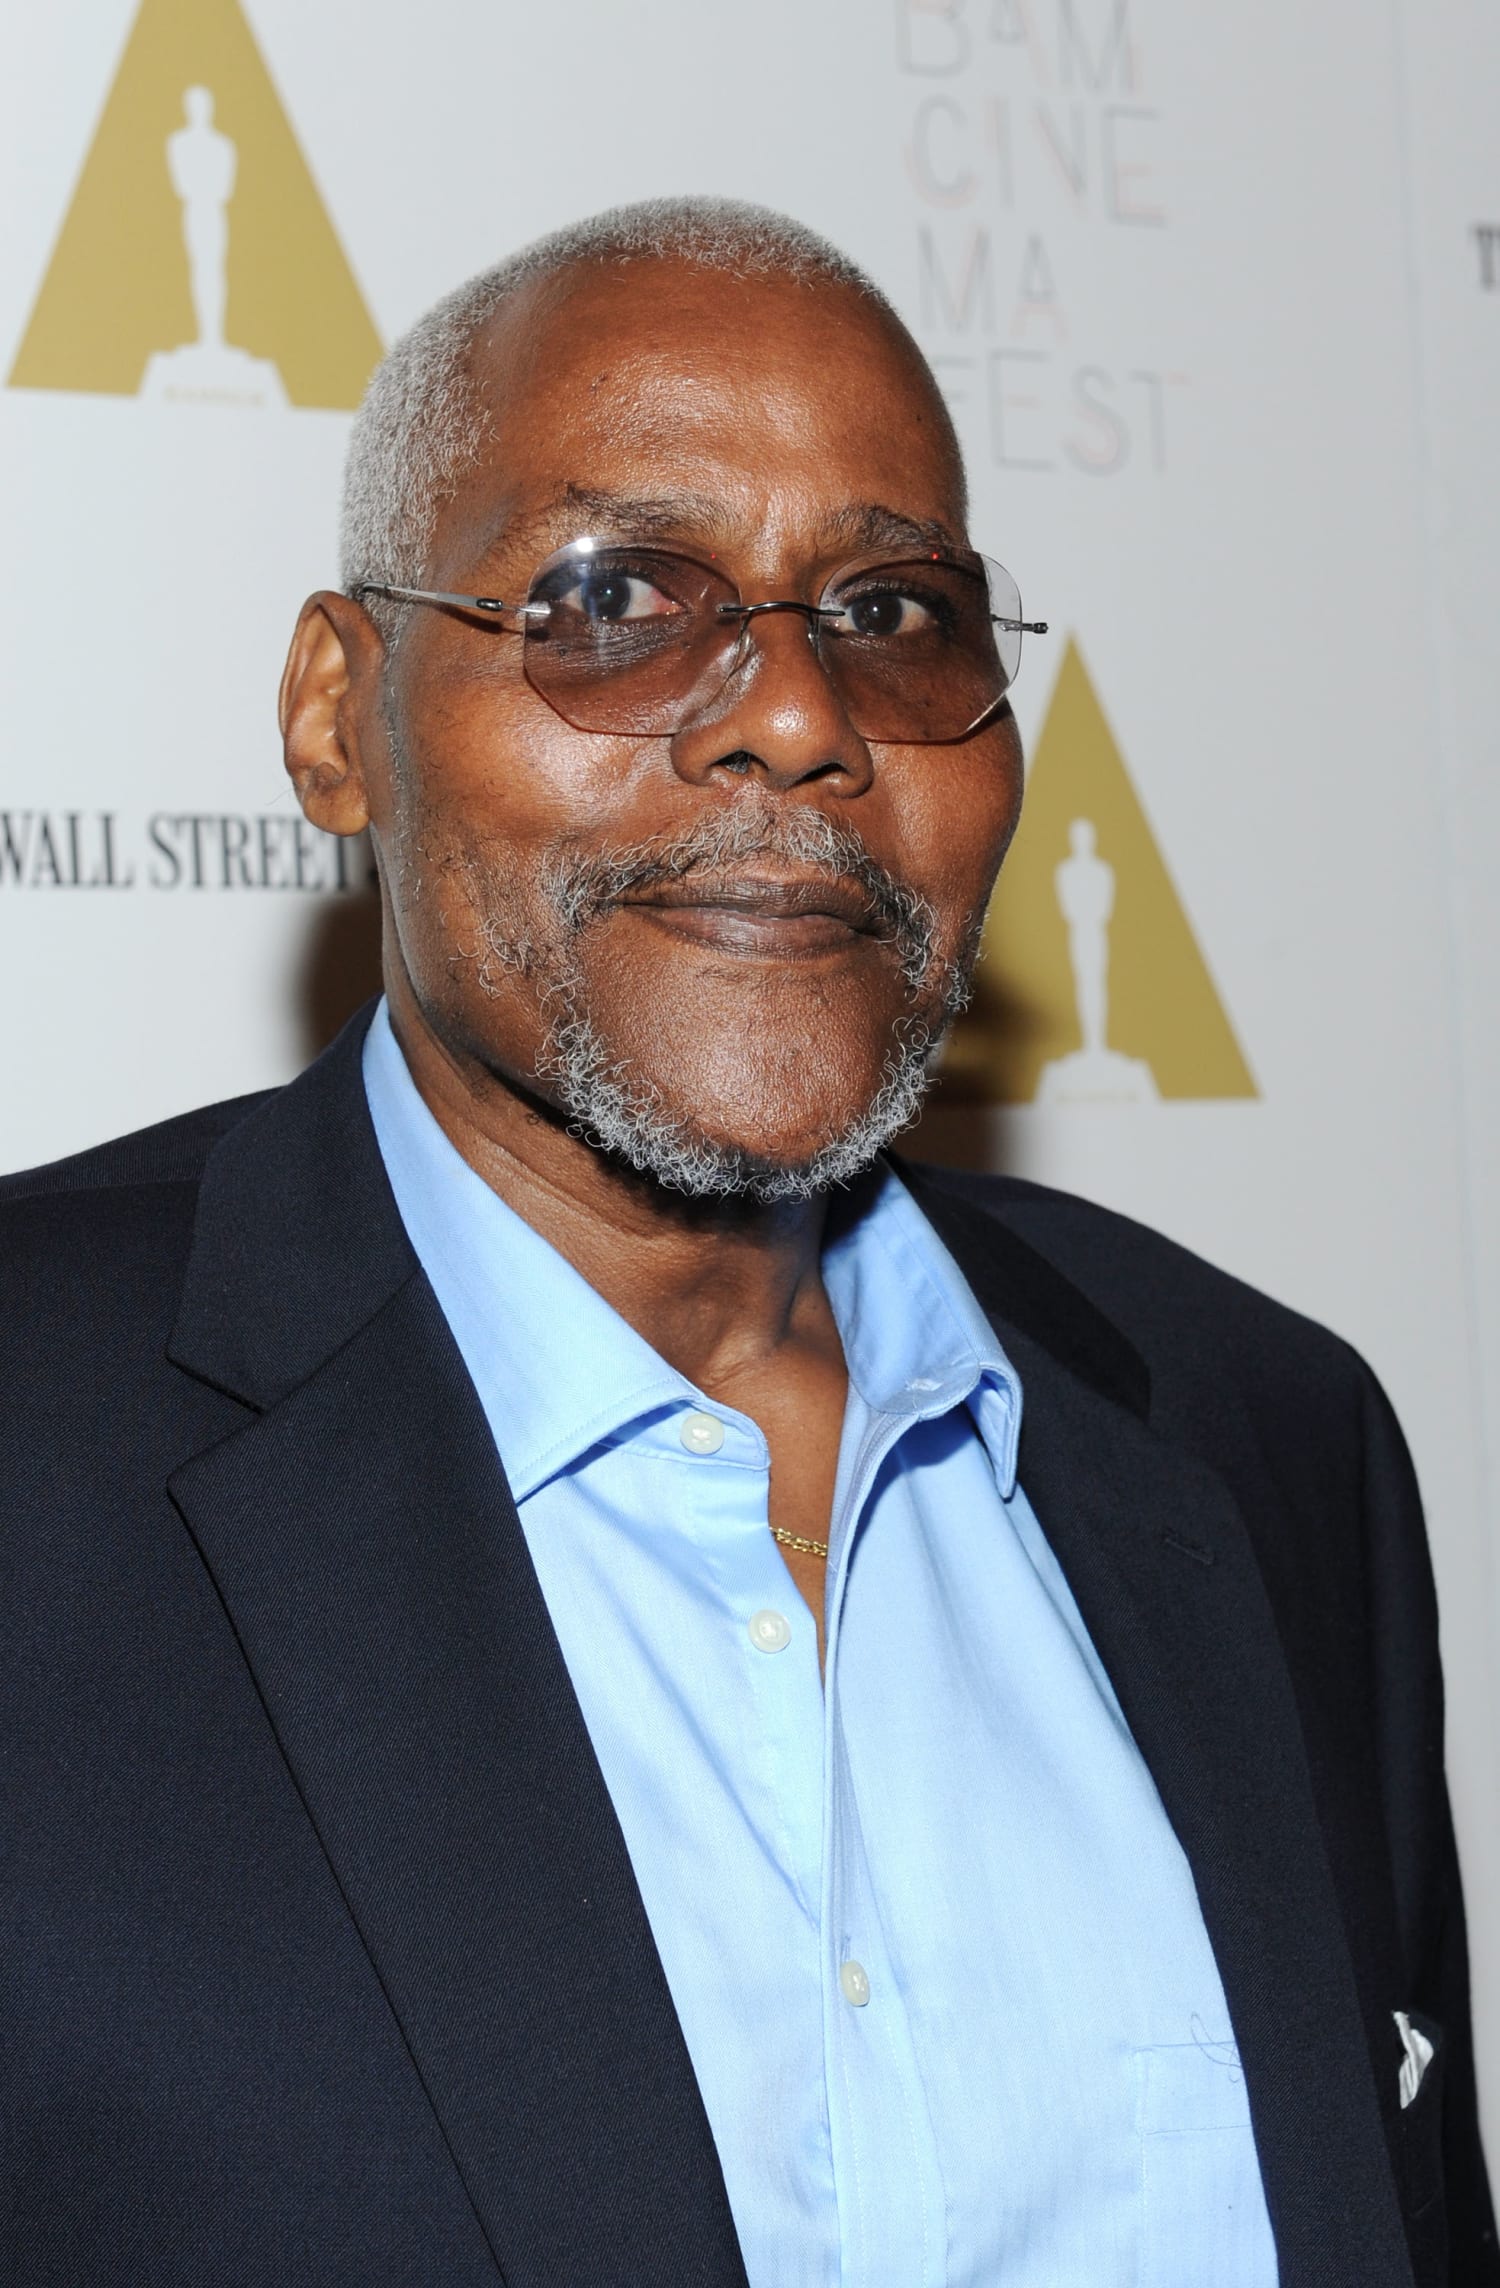 Bill Nunn, Radio Raheem in Spike Lee's 'Do the Right Thing,' Dies at 62